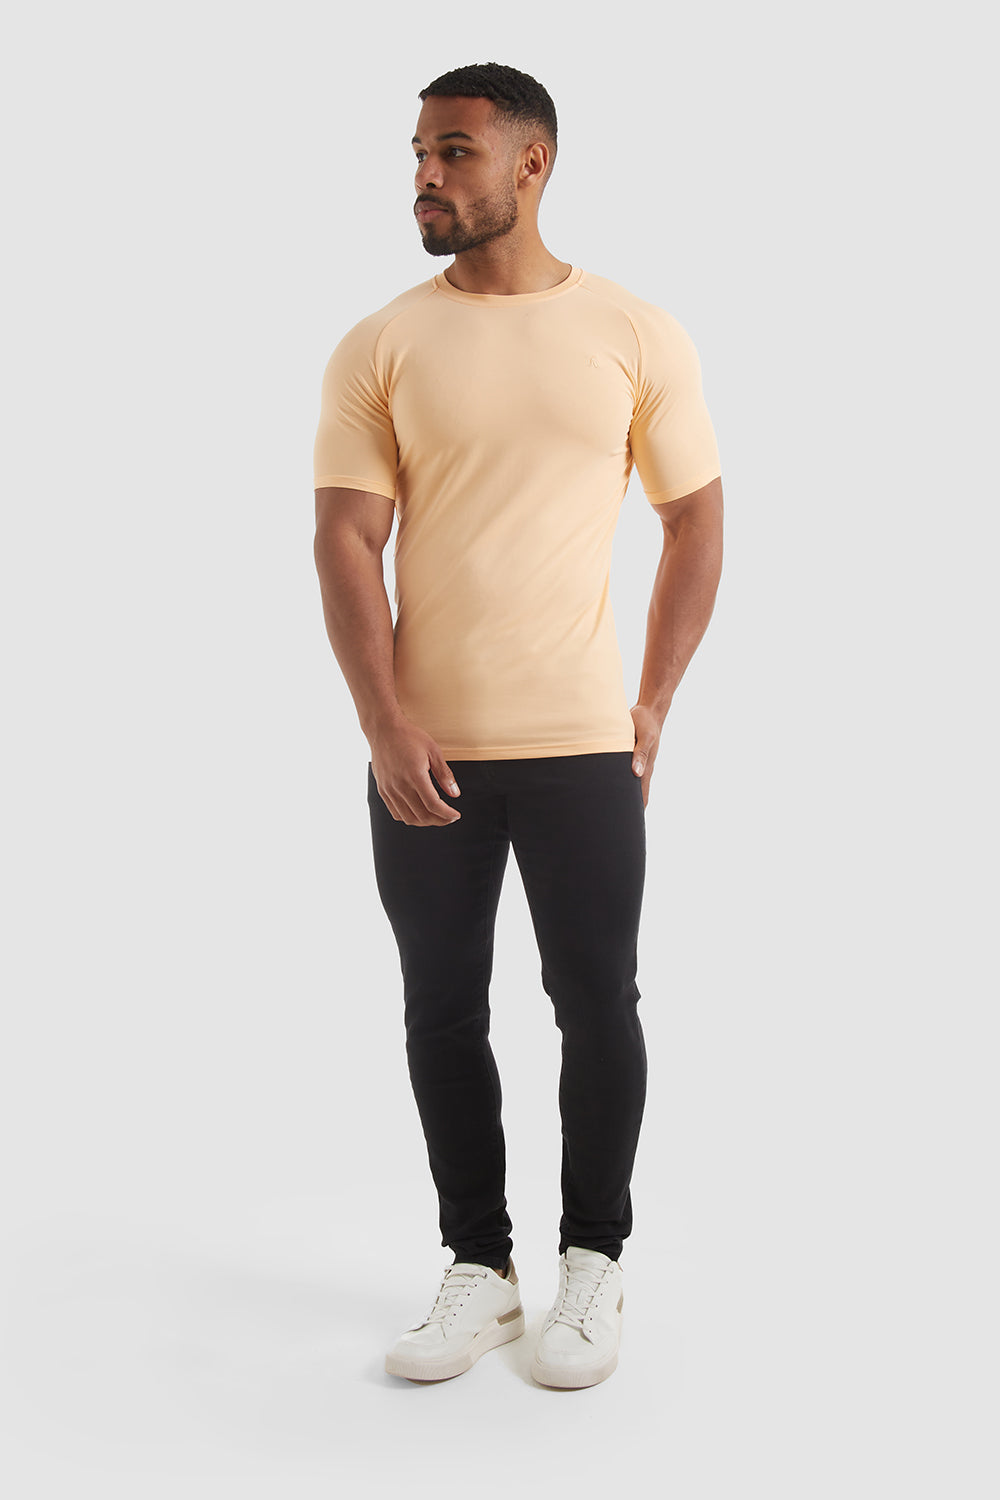 Muscle Fit T-Shirt in Papaya - TAILORED ATHLETE - ROW